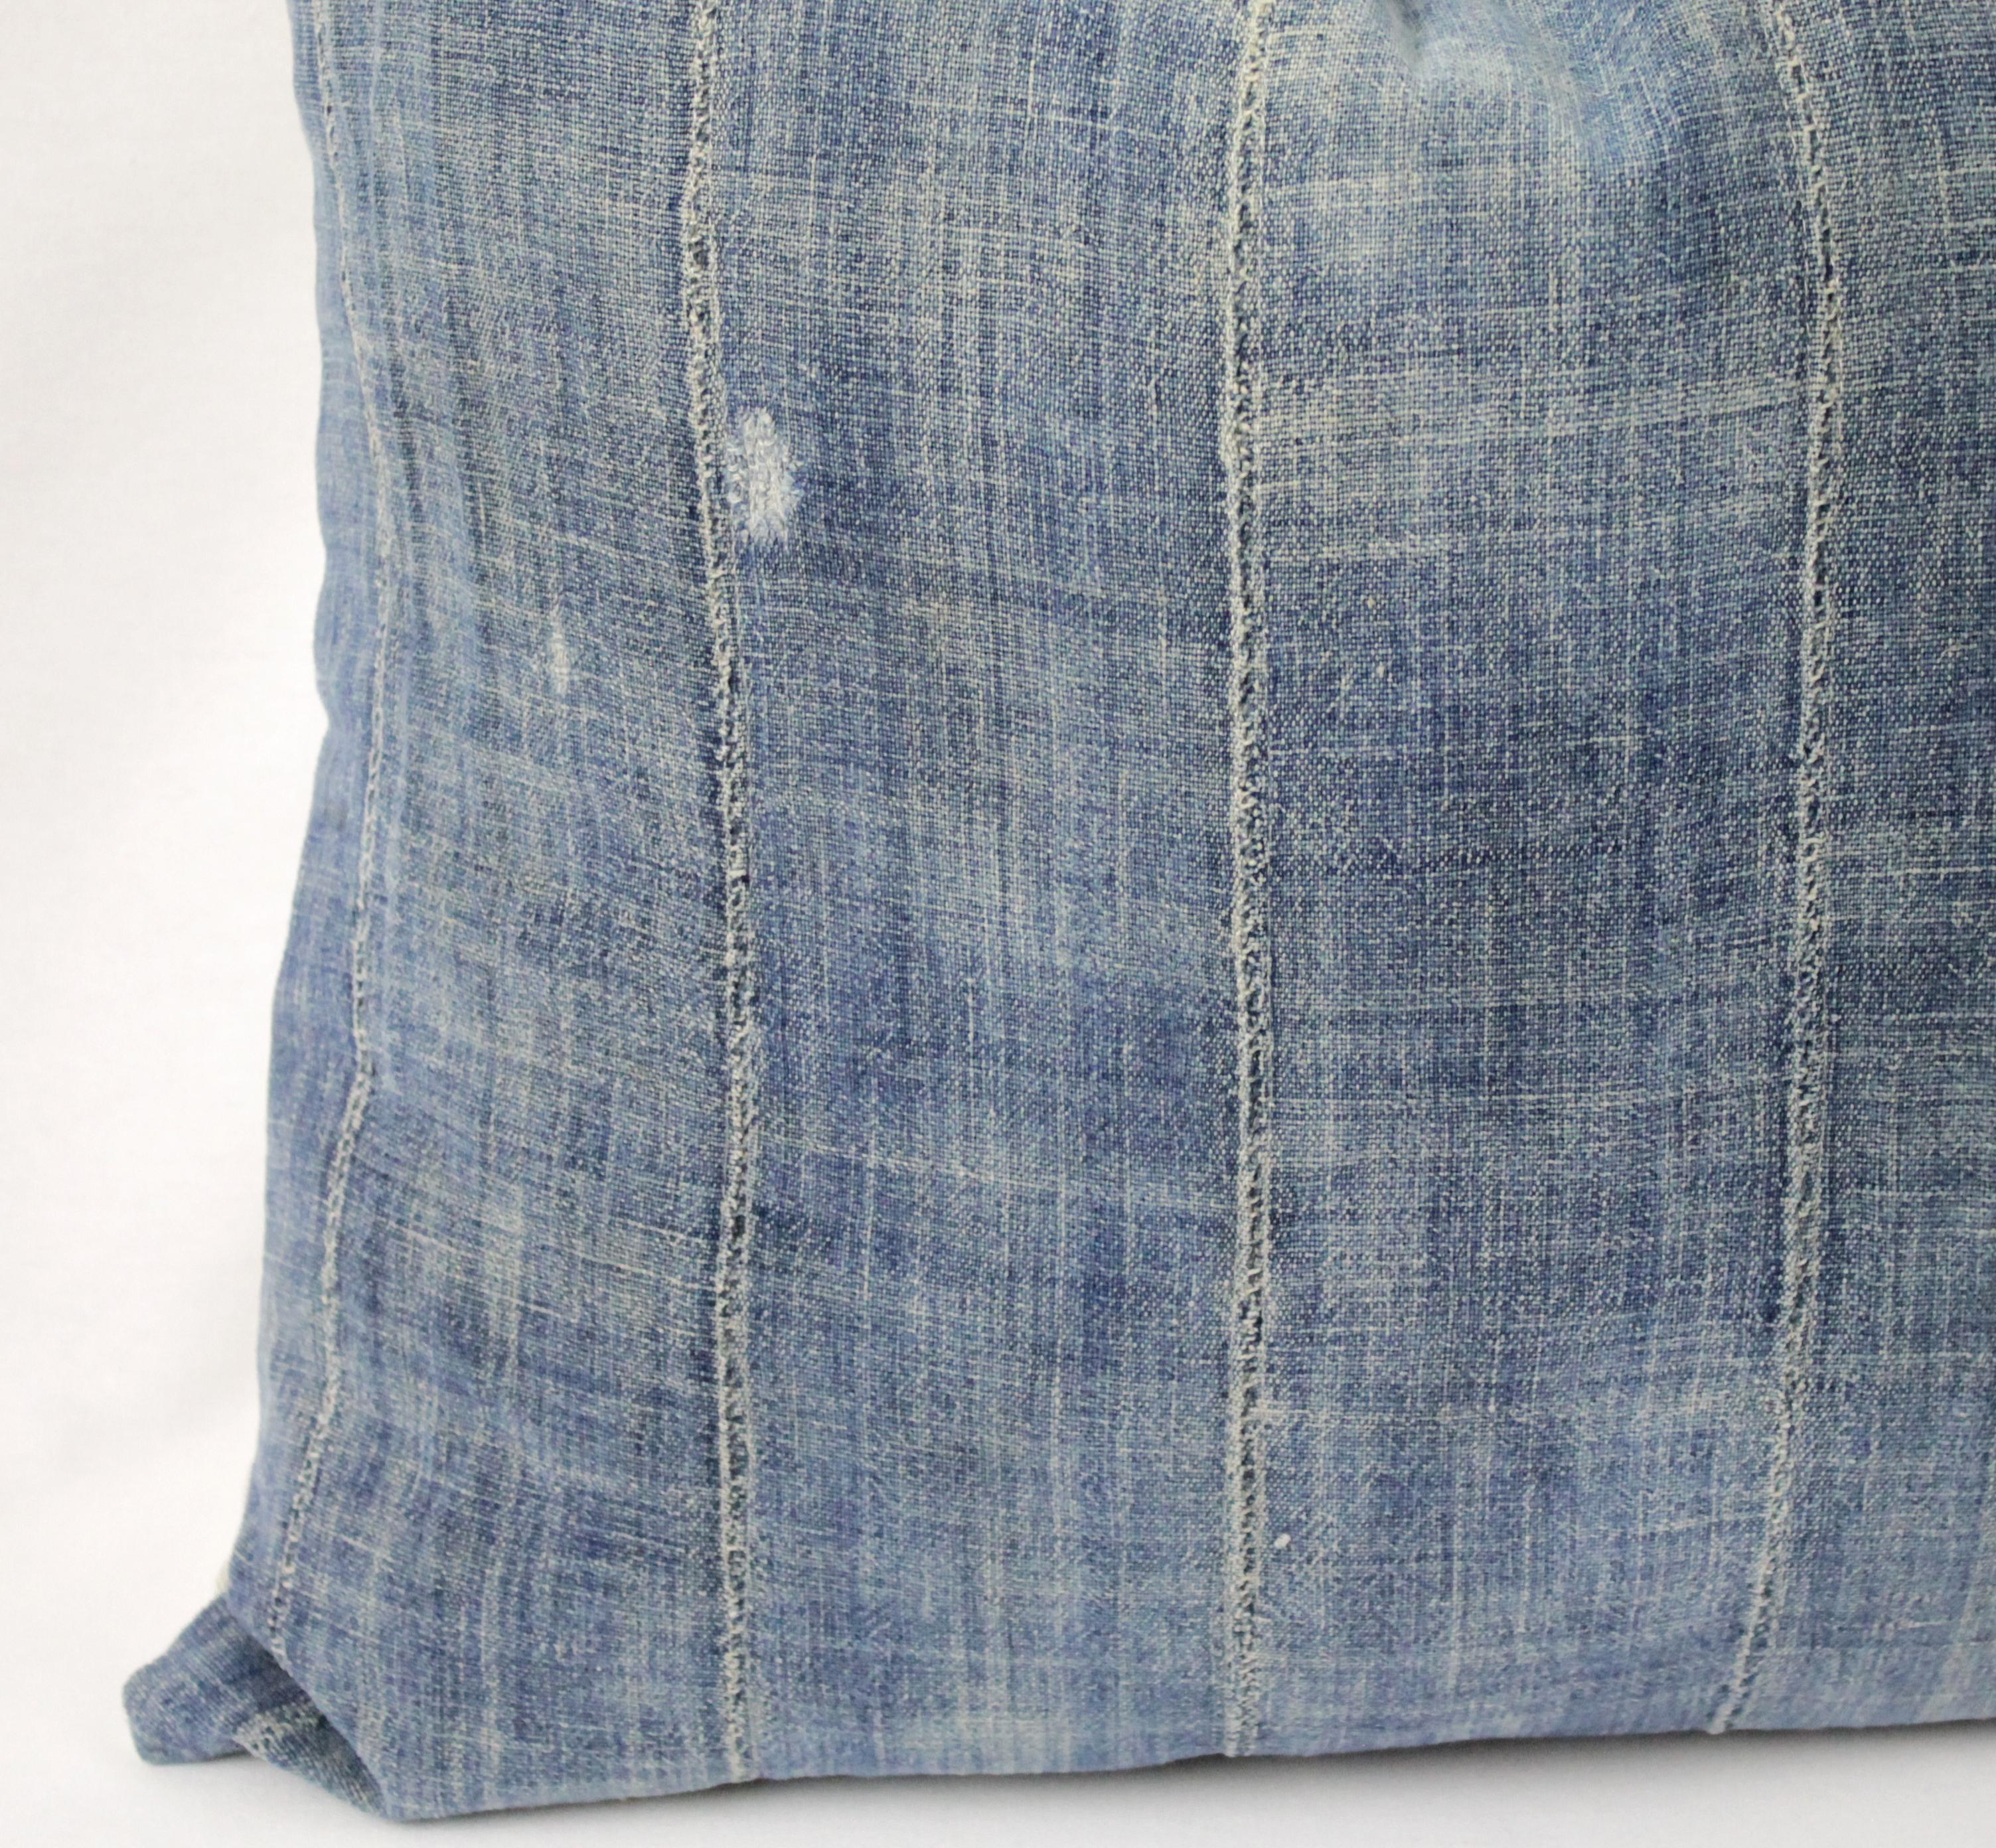 Vintage Blue Distressed Pillow with Vertical Seams  1